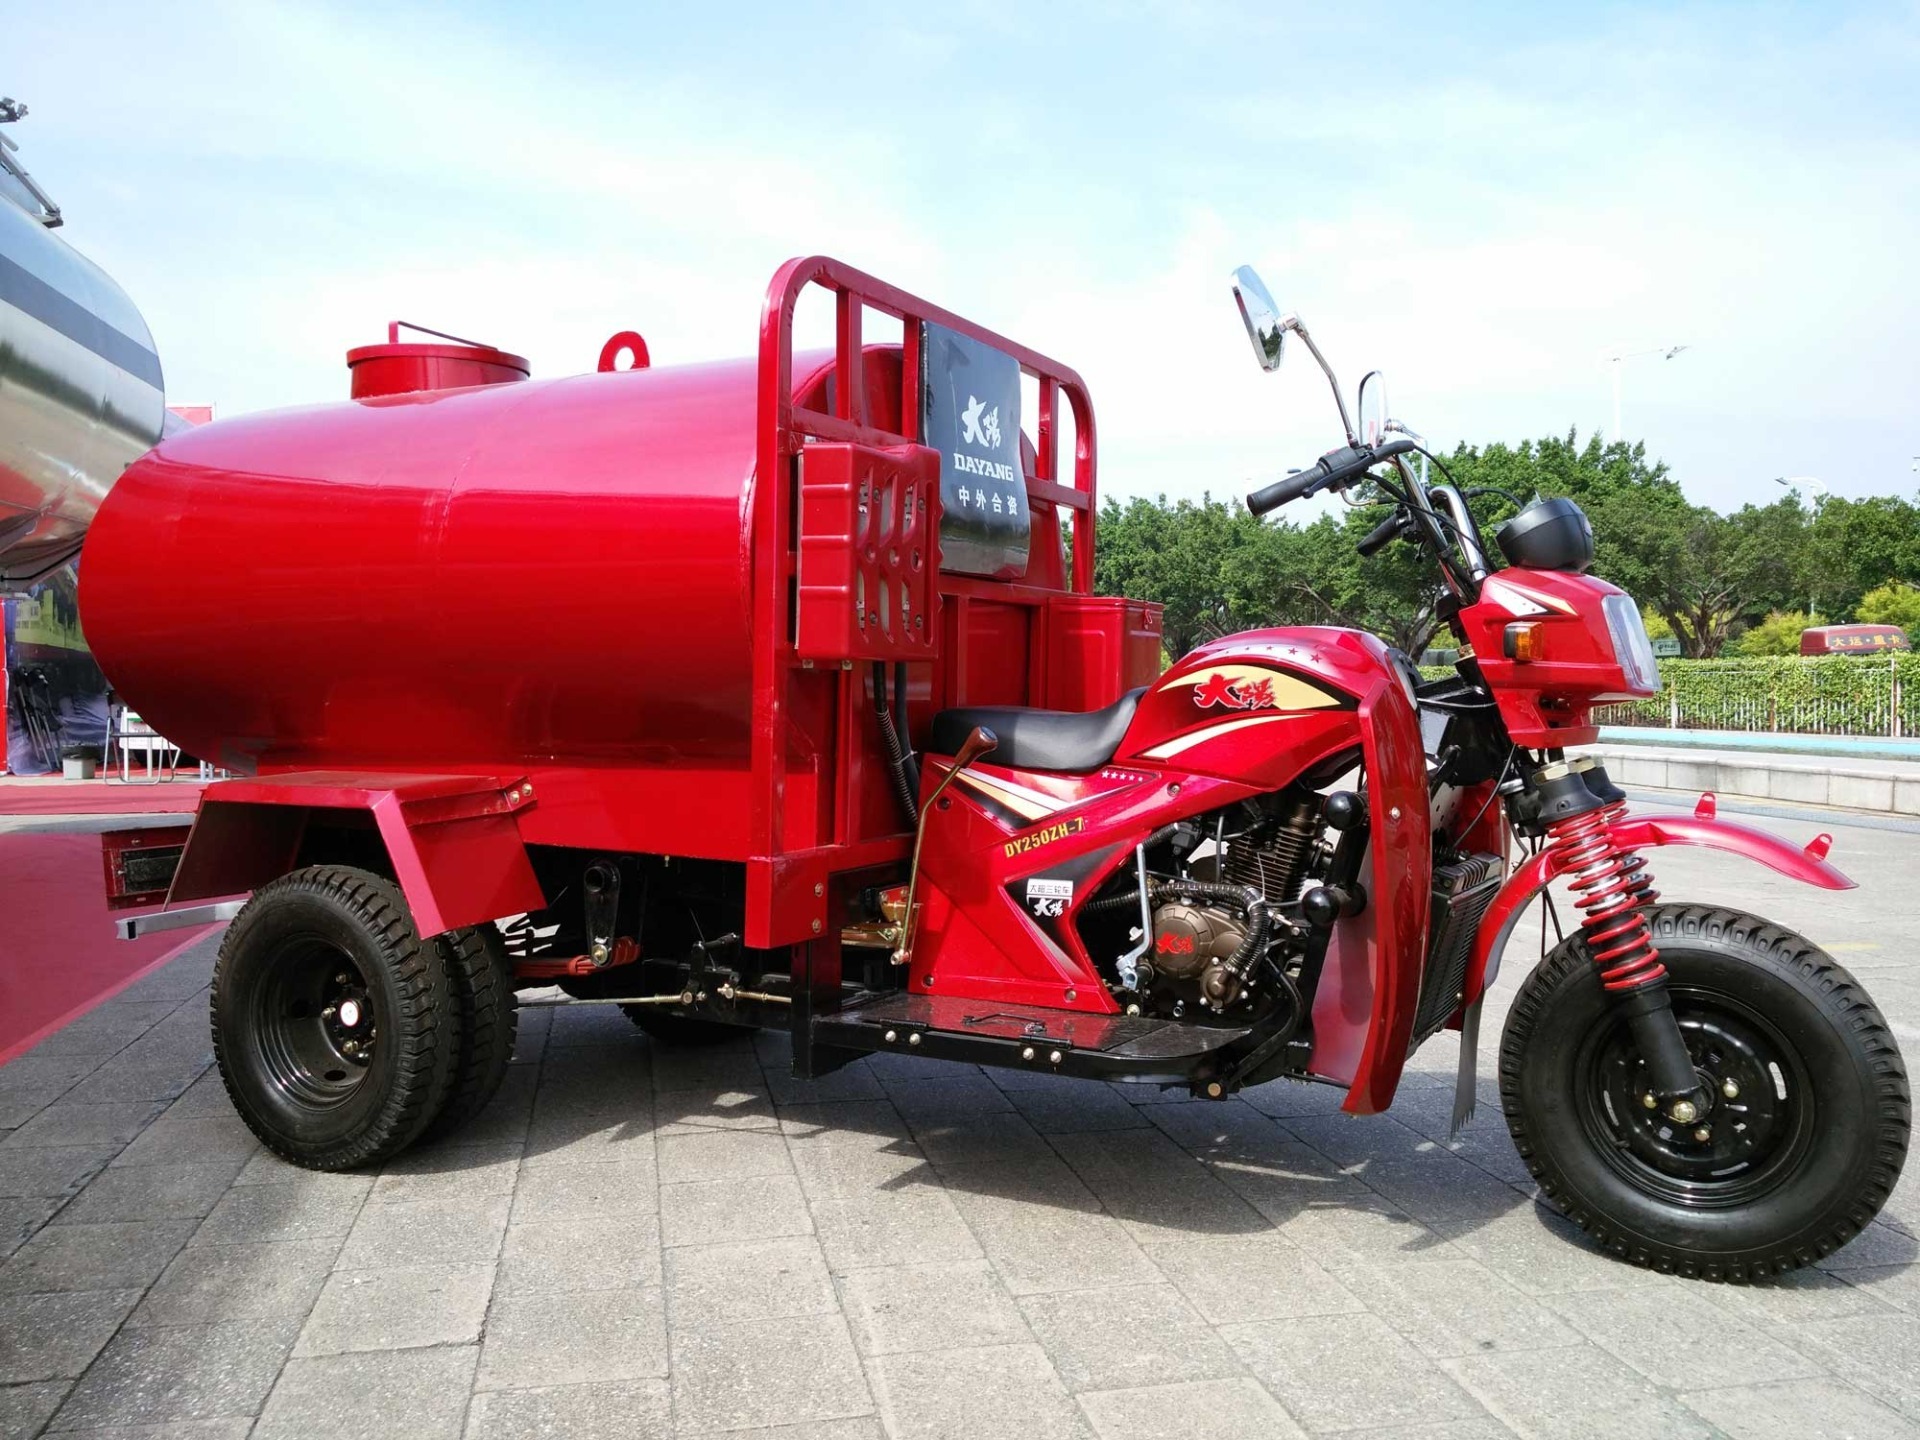 DY-TW1 Water tank tricycle for selling